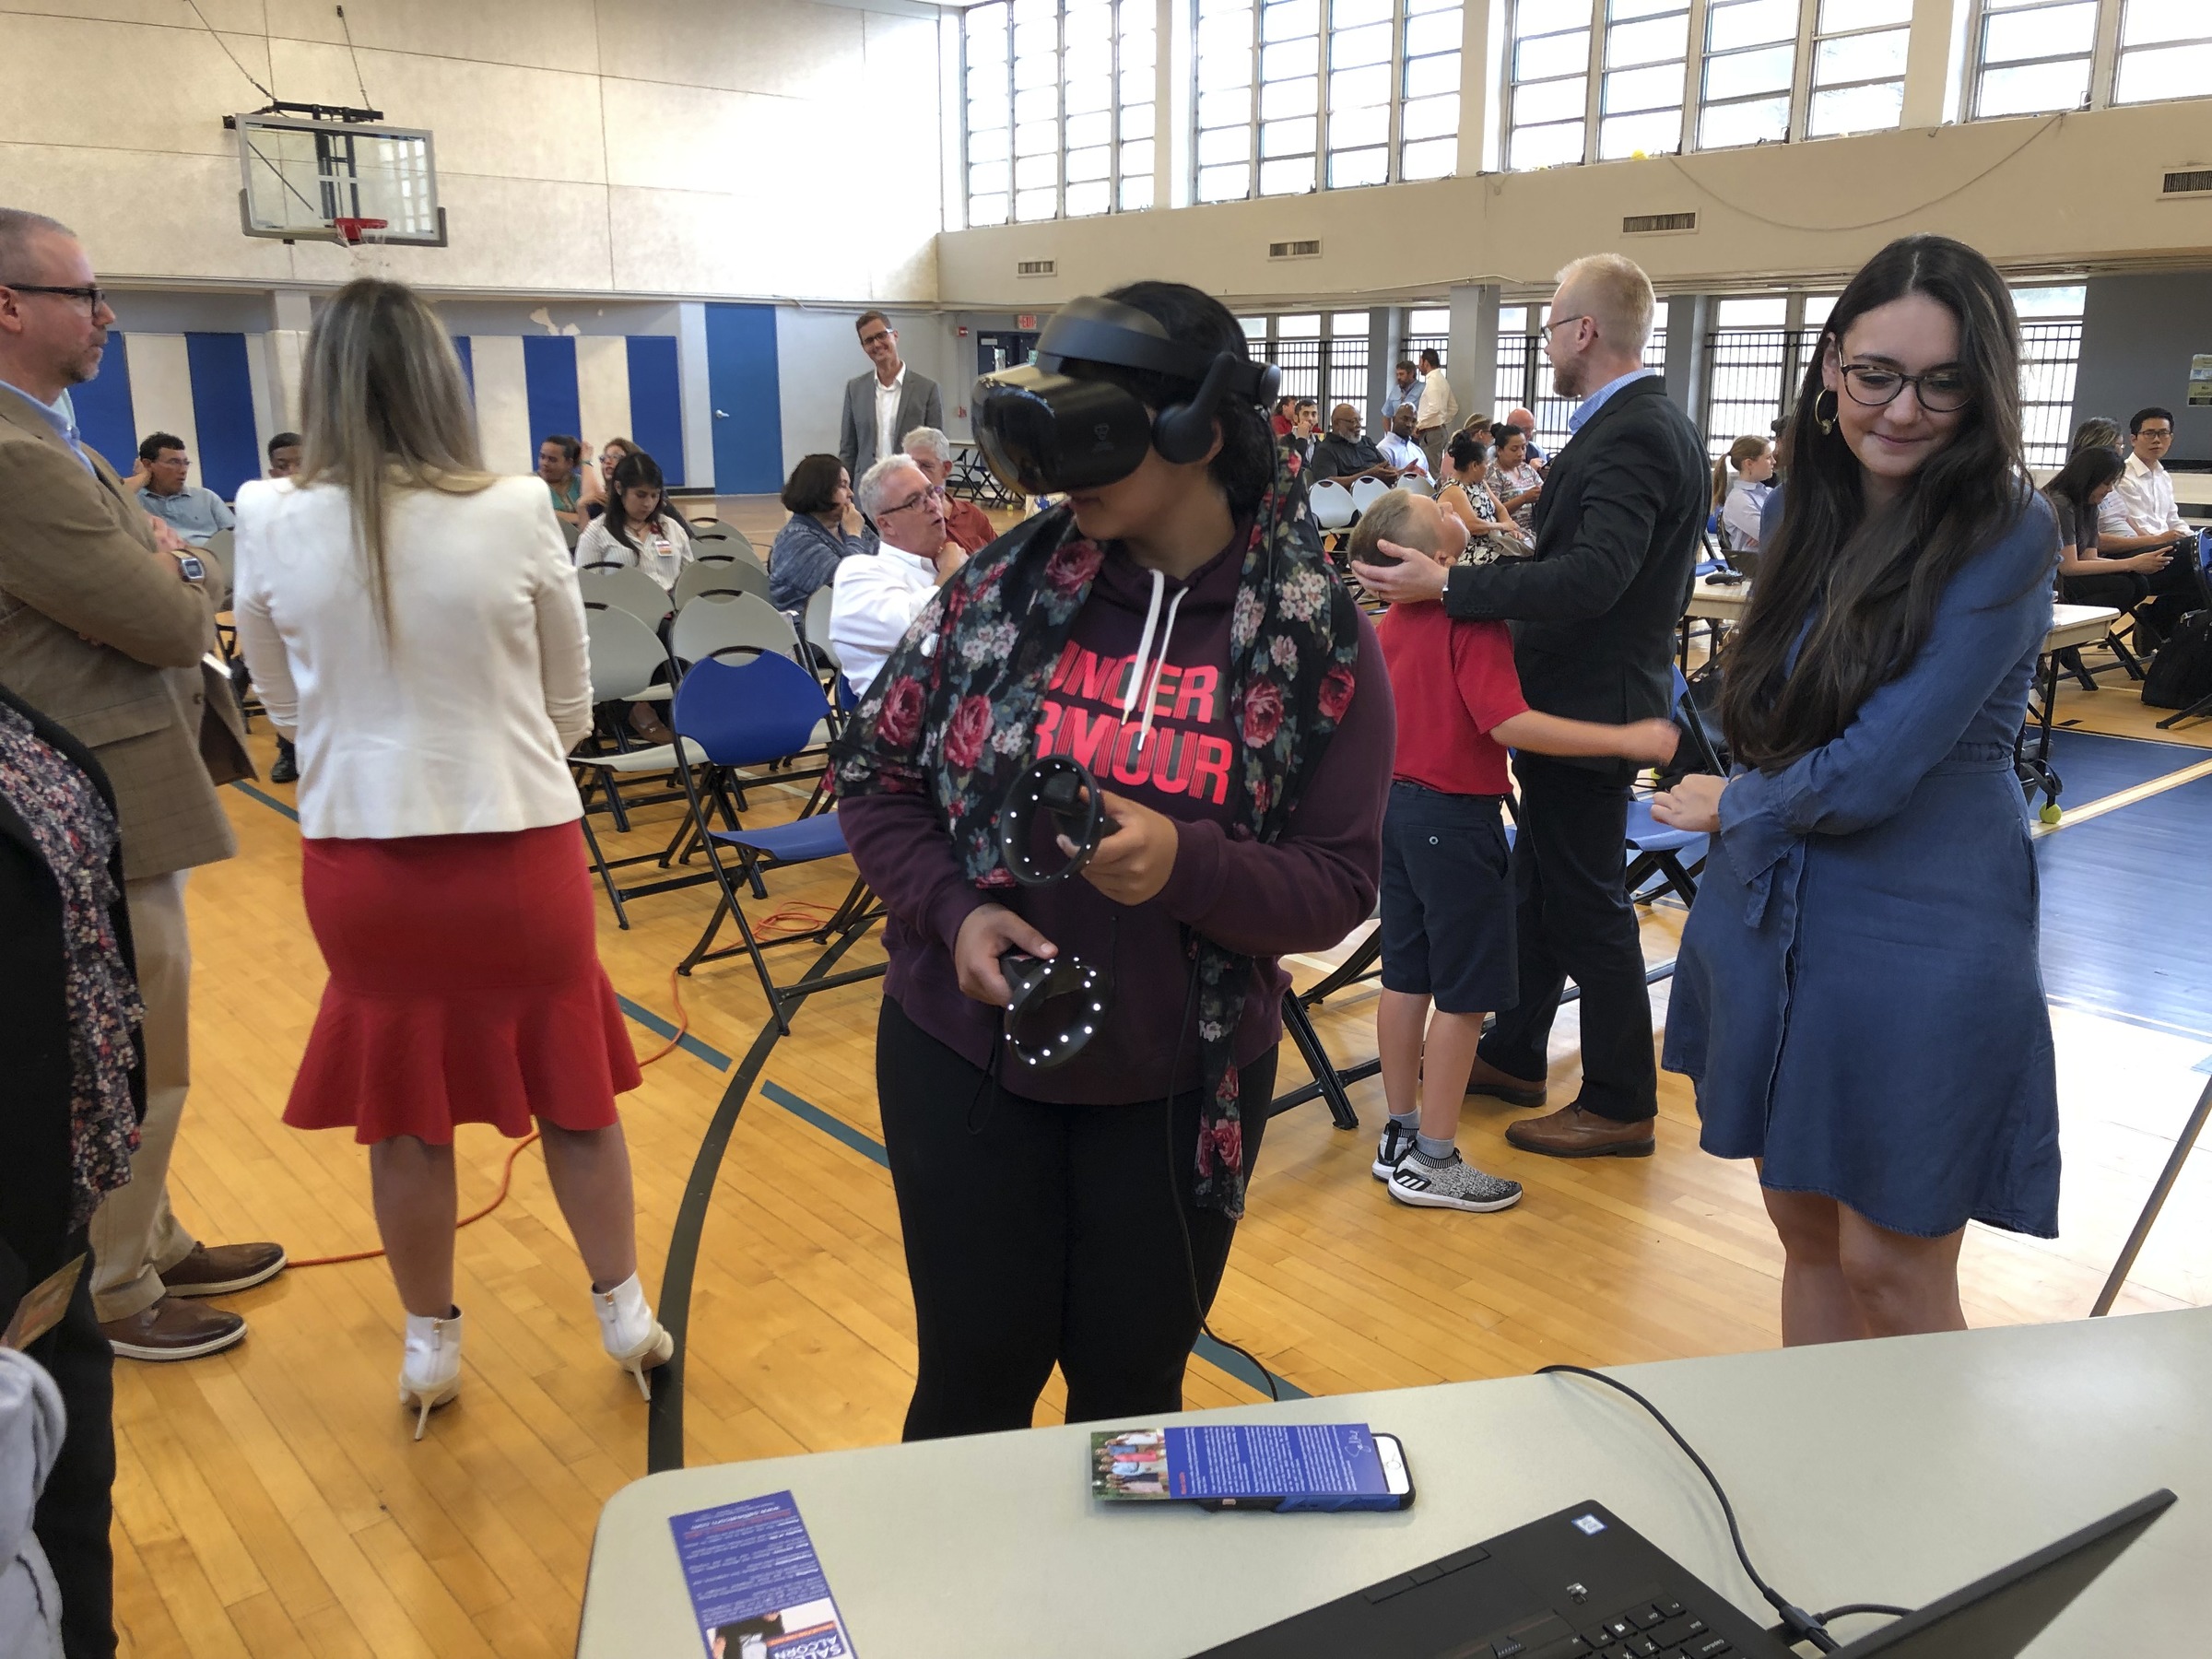 student eperiences vr tour of alief community center